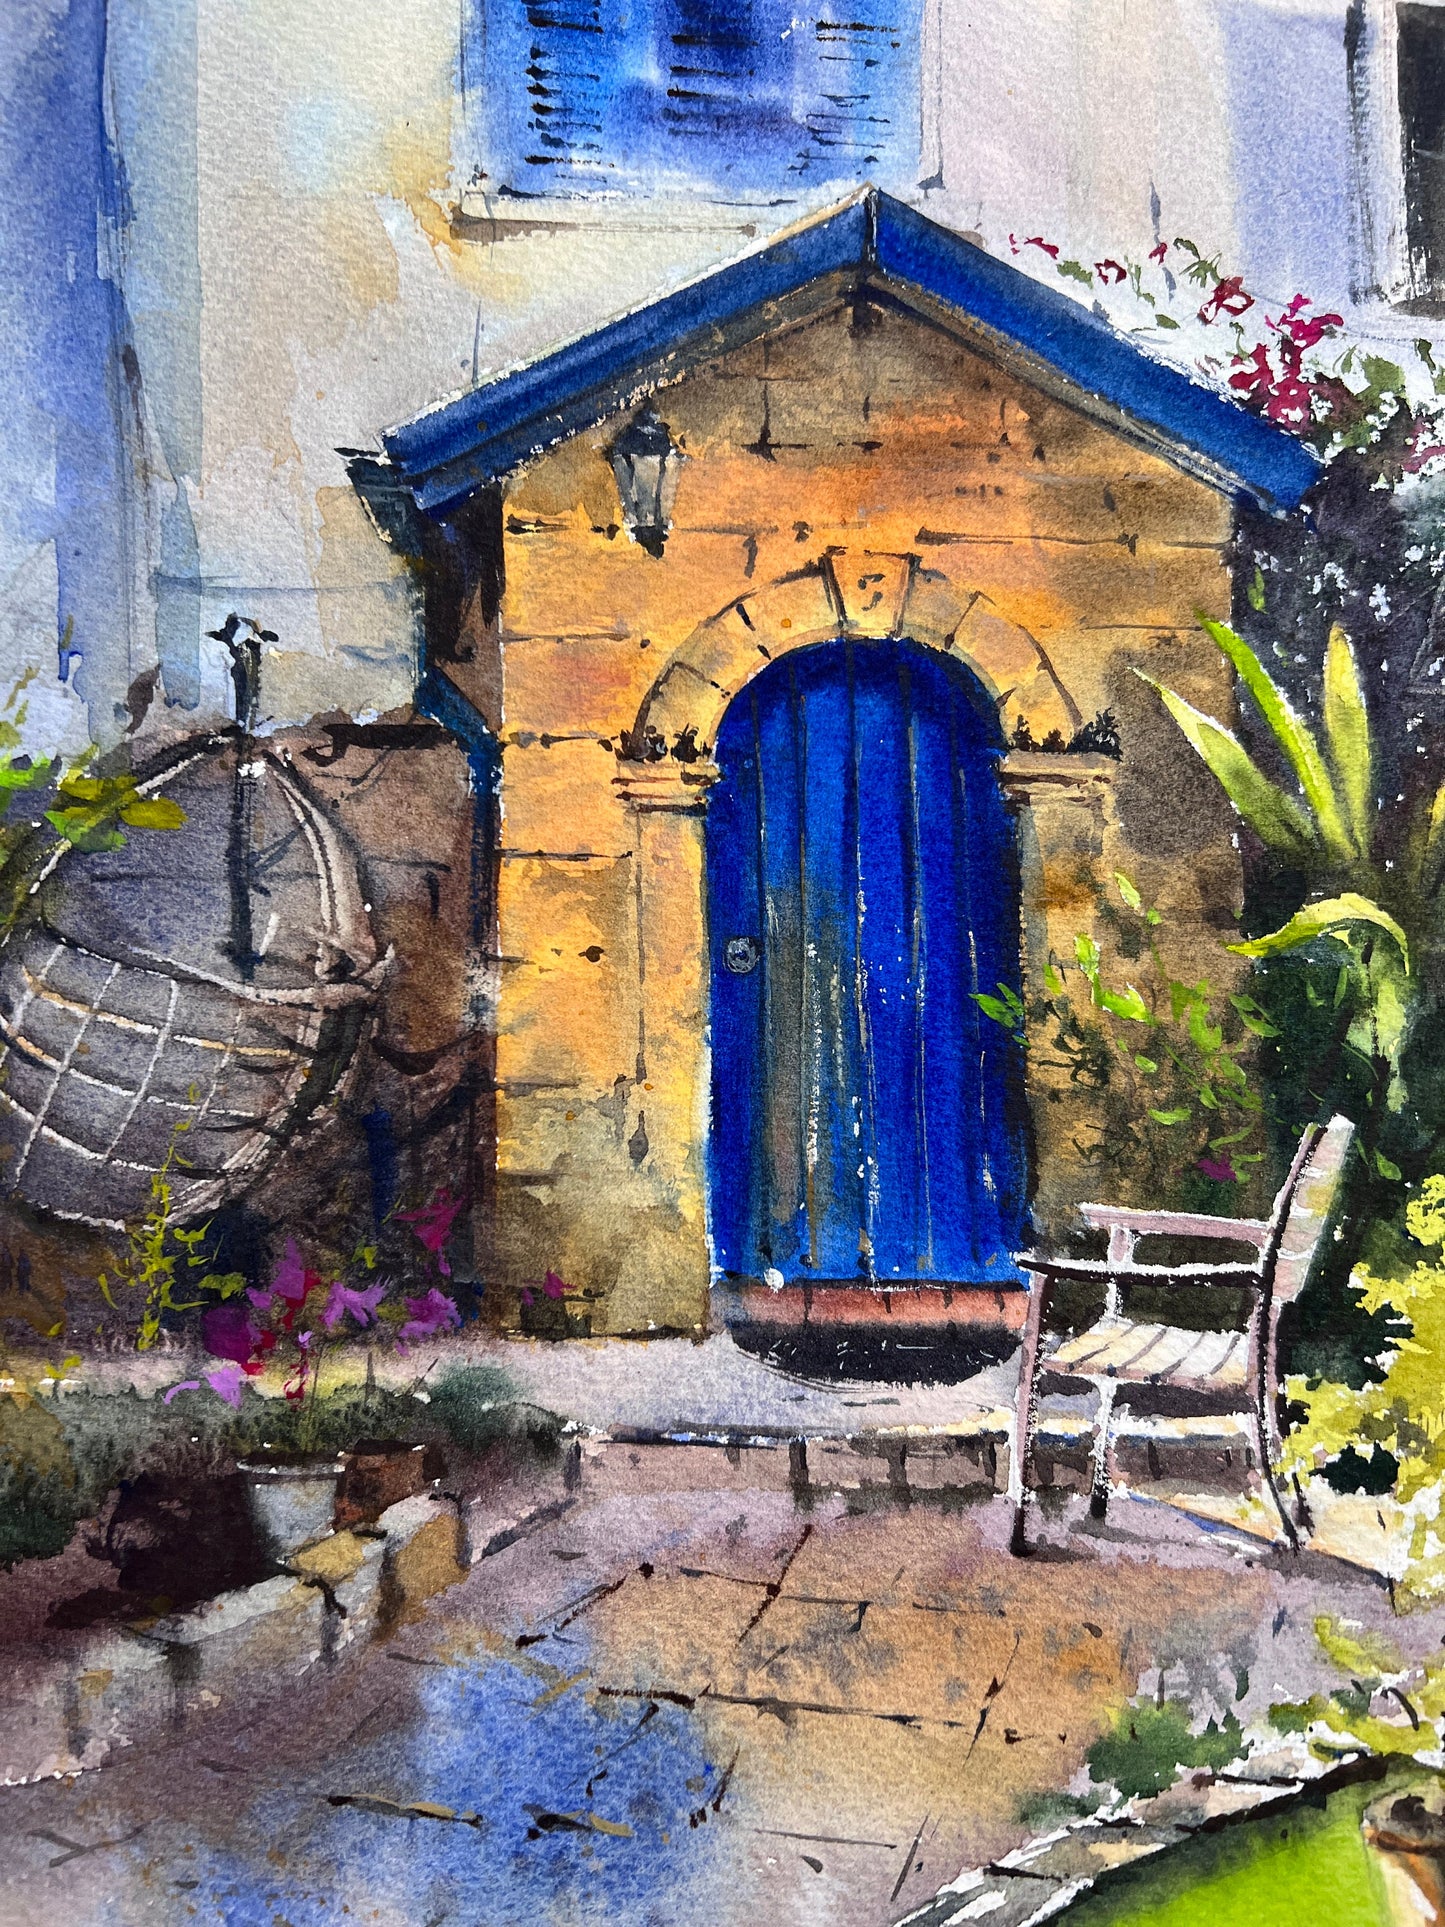 Original Watercolor Art: Girne Center, Northern Cyprus #3 with Charming Mediterranean Architecture - 12x16 inches